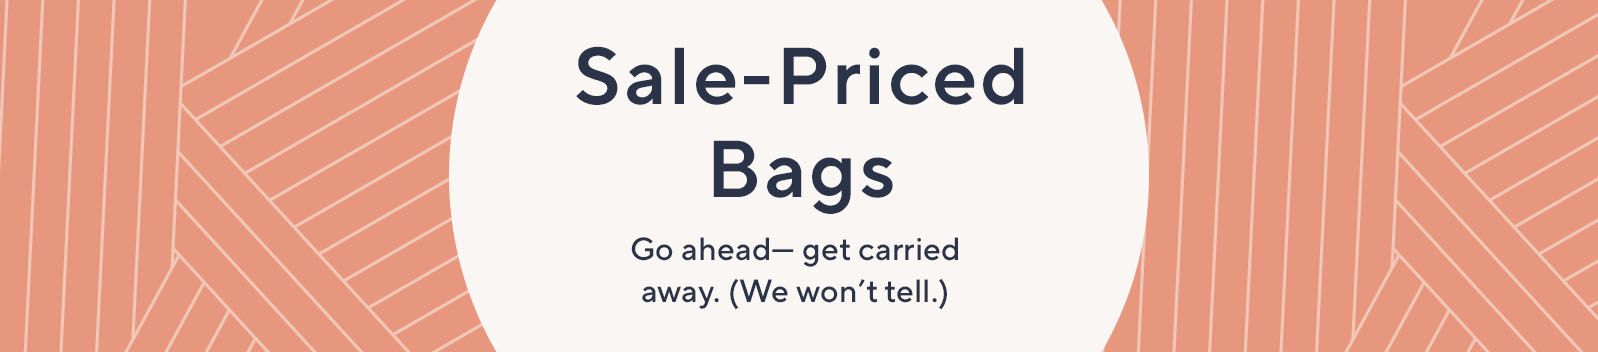 Sale-Priced Bags. Go ahead— get carried away. (We won't tell.)